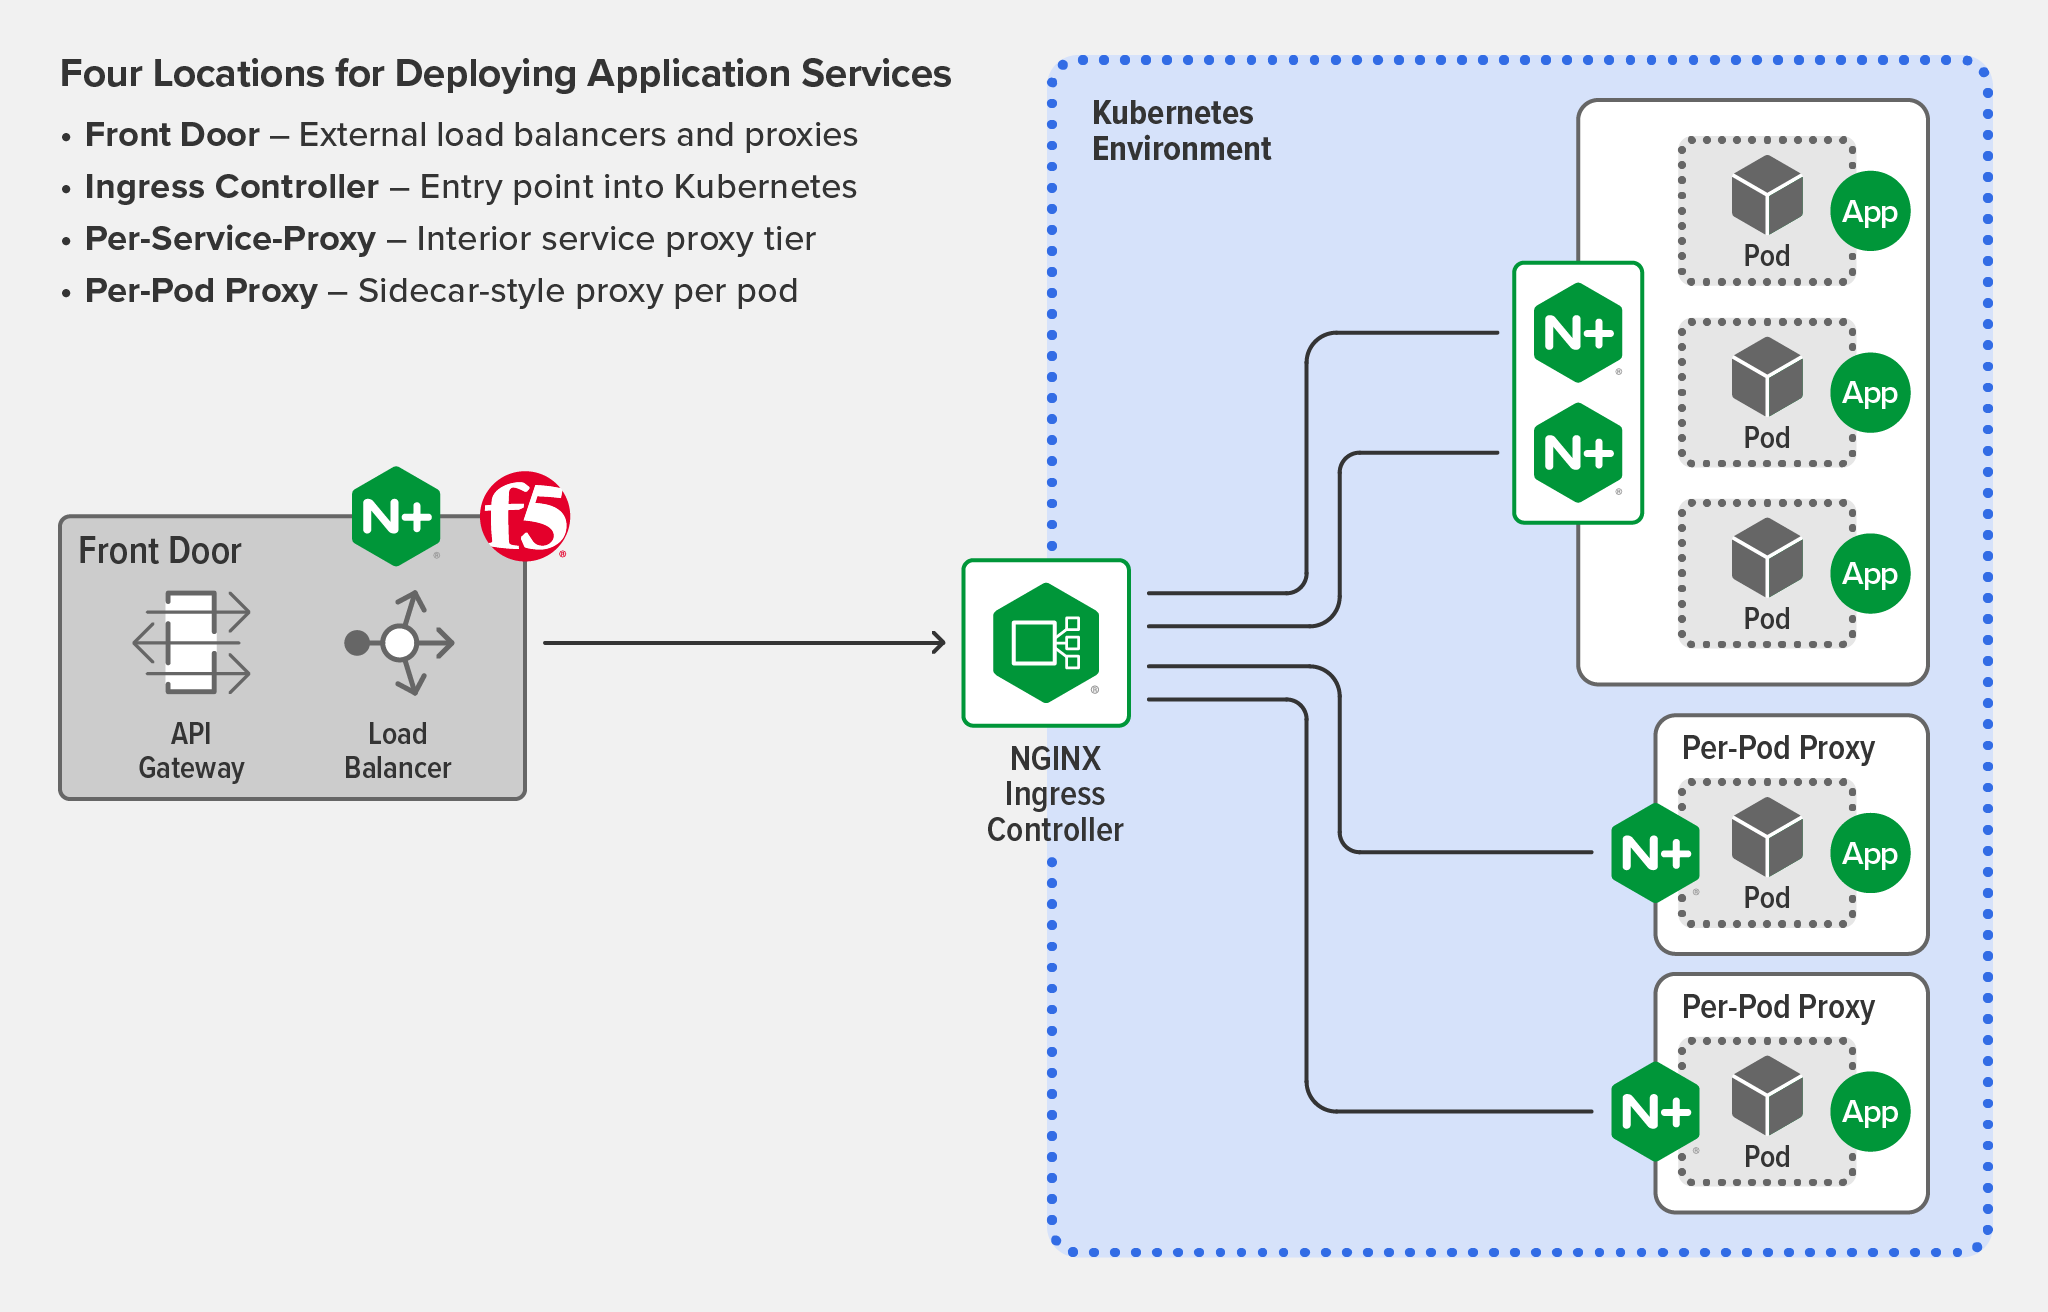 Diagram showing four places to deploy app services in Kubernetes: front door, Ingress controller, per-service proxy, per-pod proxy